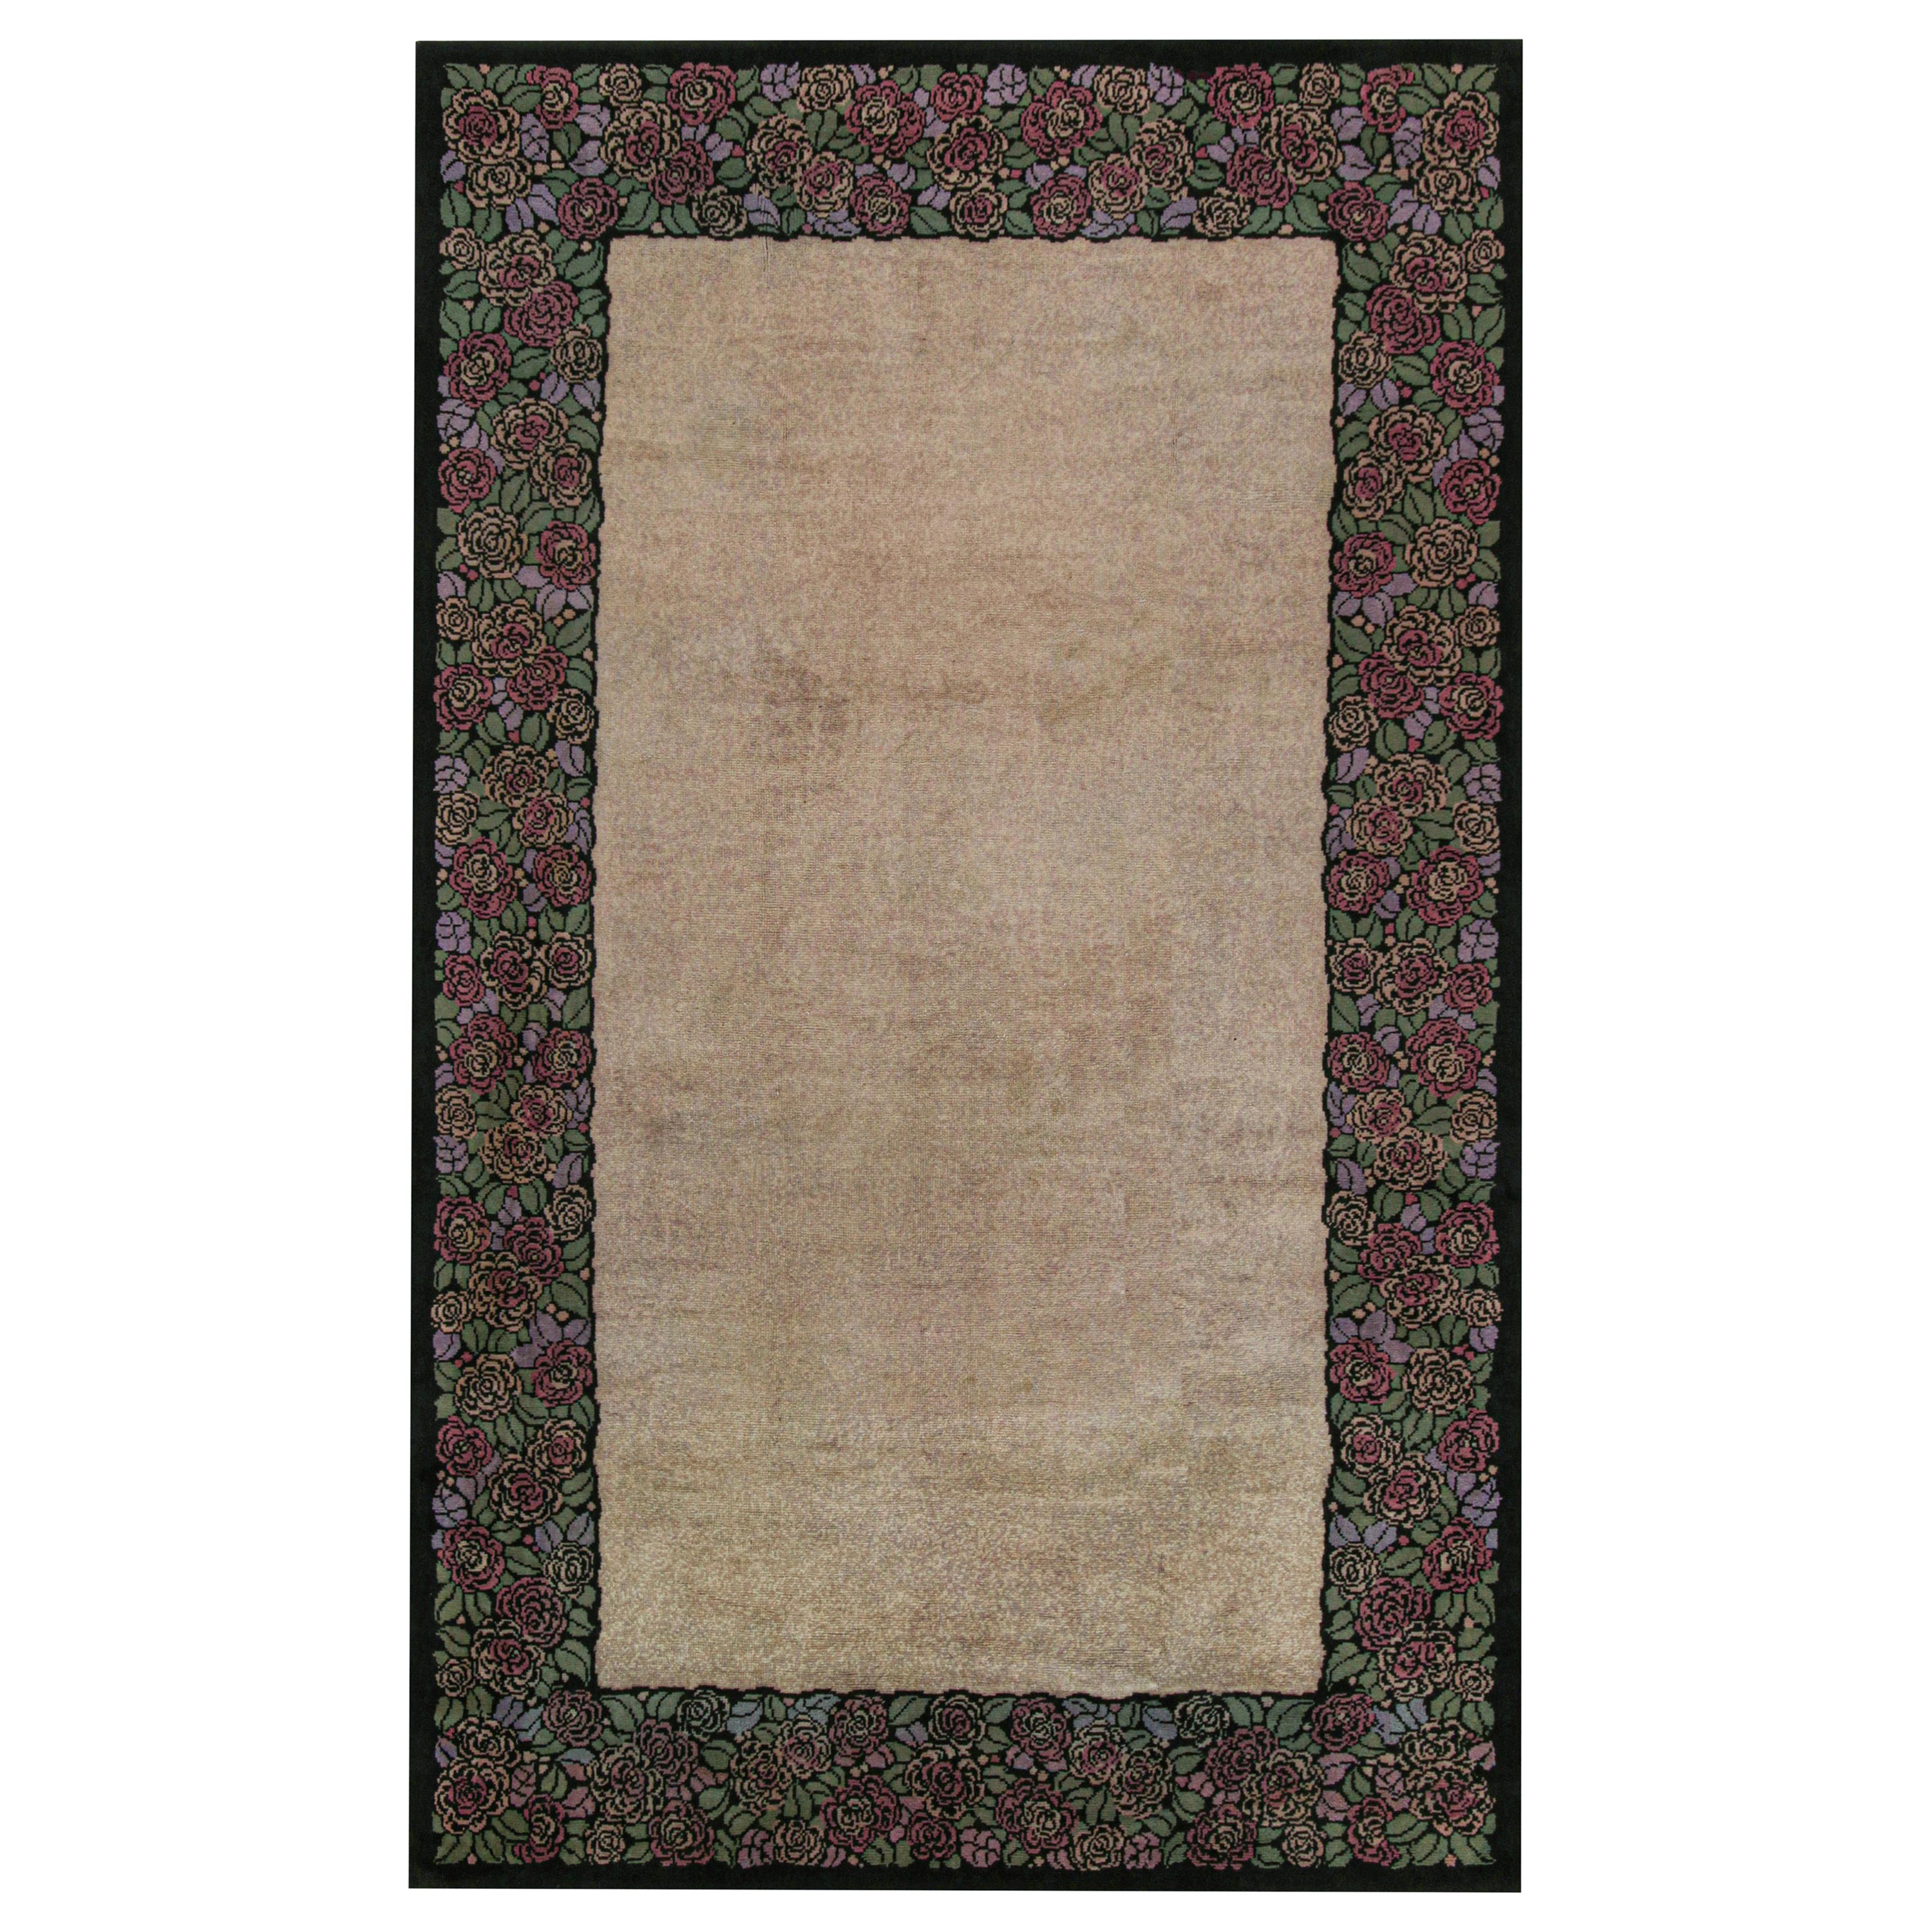 Antique Dutch Art Deco Rug in Beige Open Field with Floral Border by Rug & Kilim